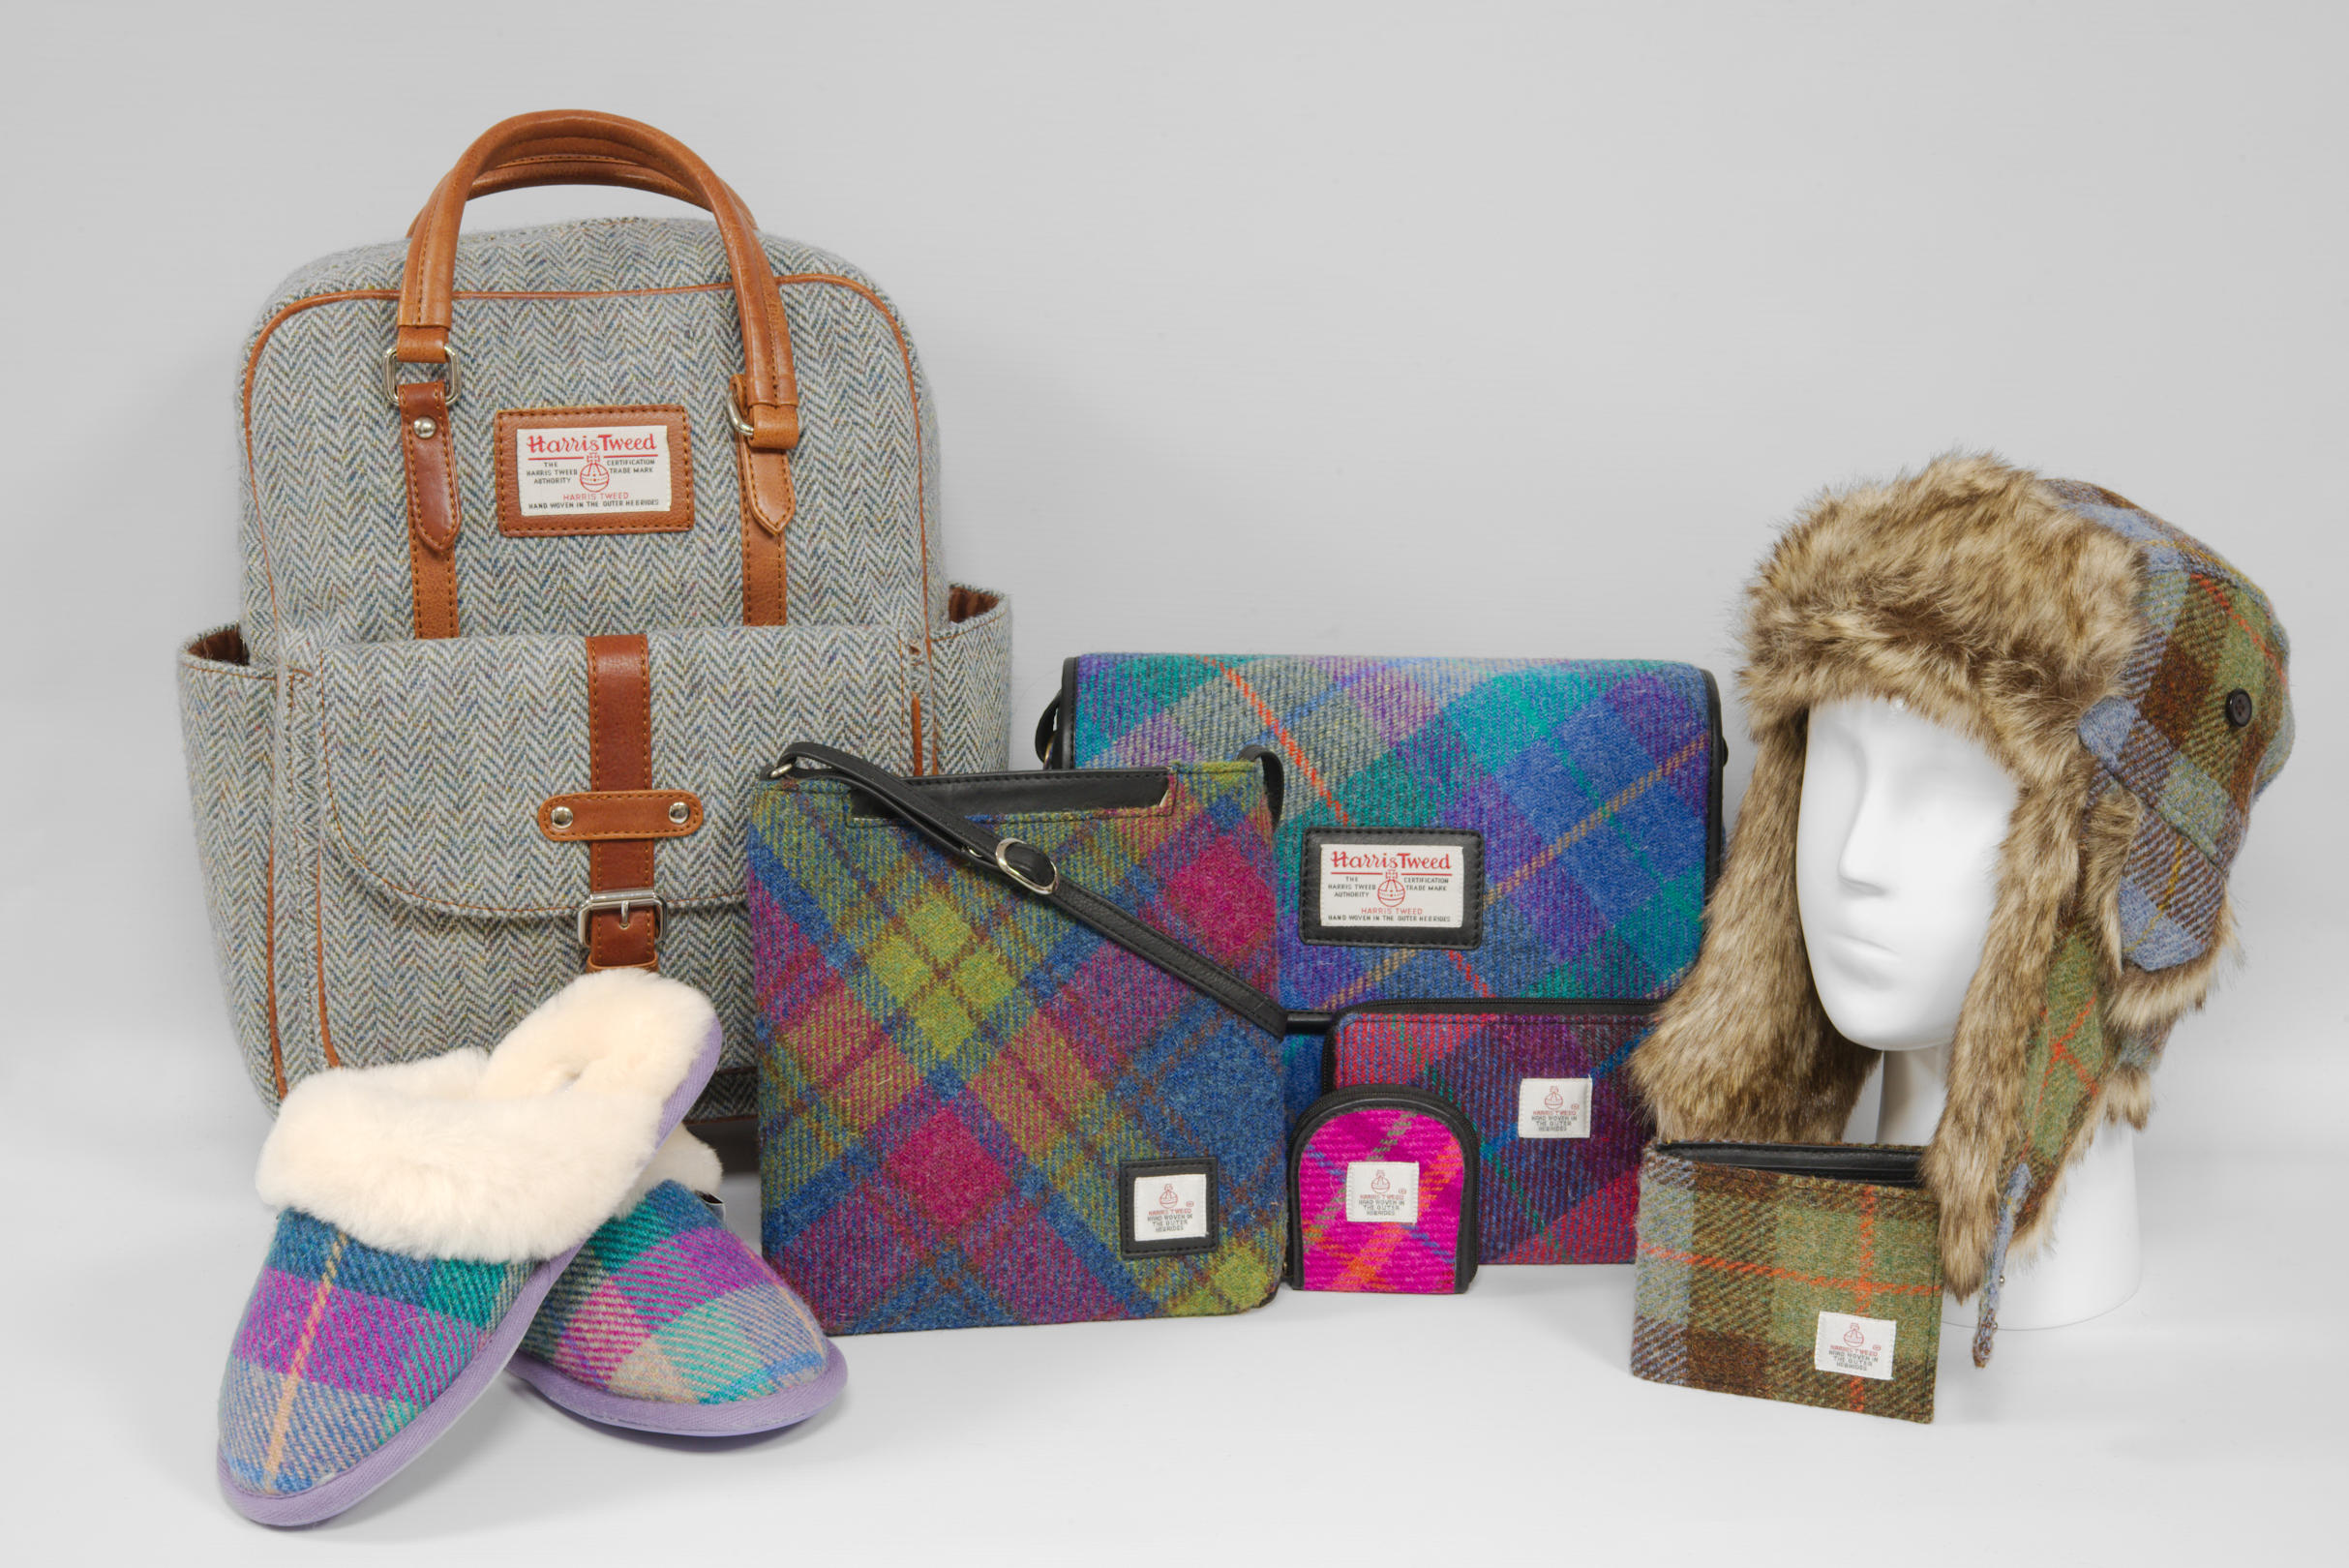 Products from Harris Tweeds